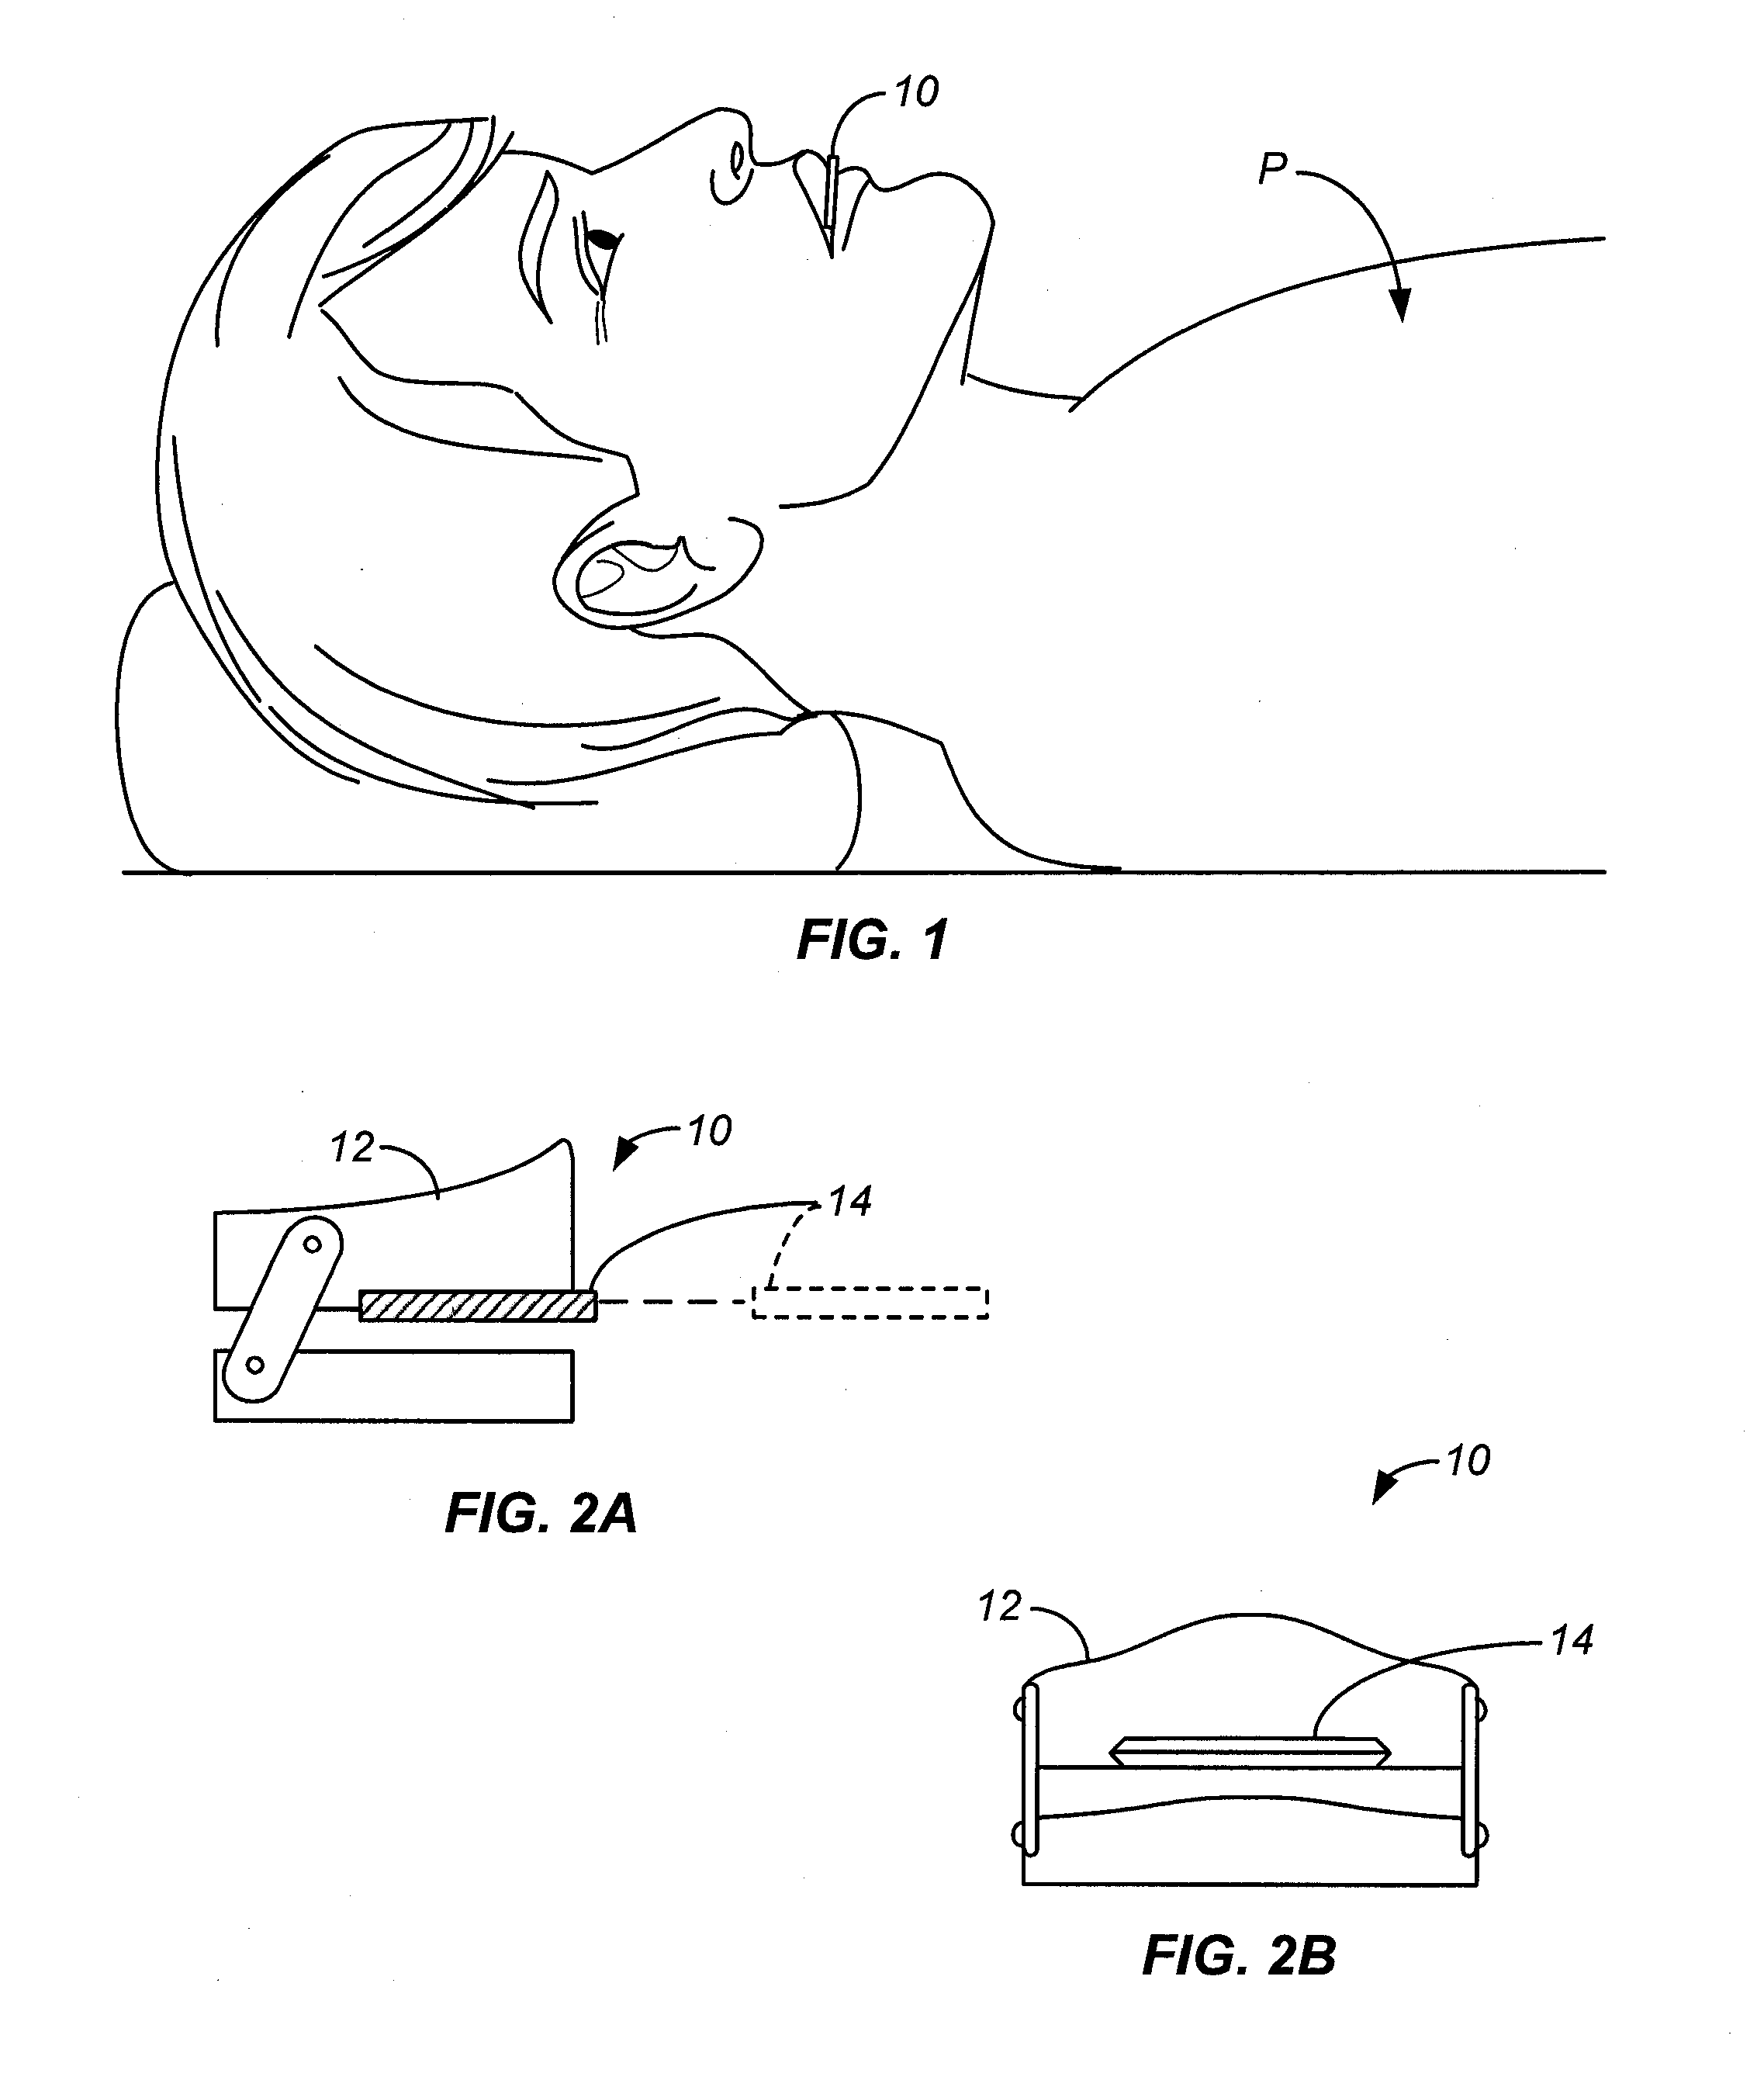 Methods and systems for monitoring sleep positions